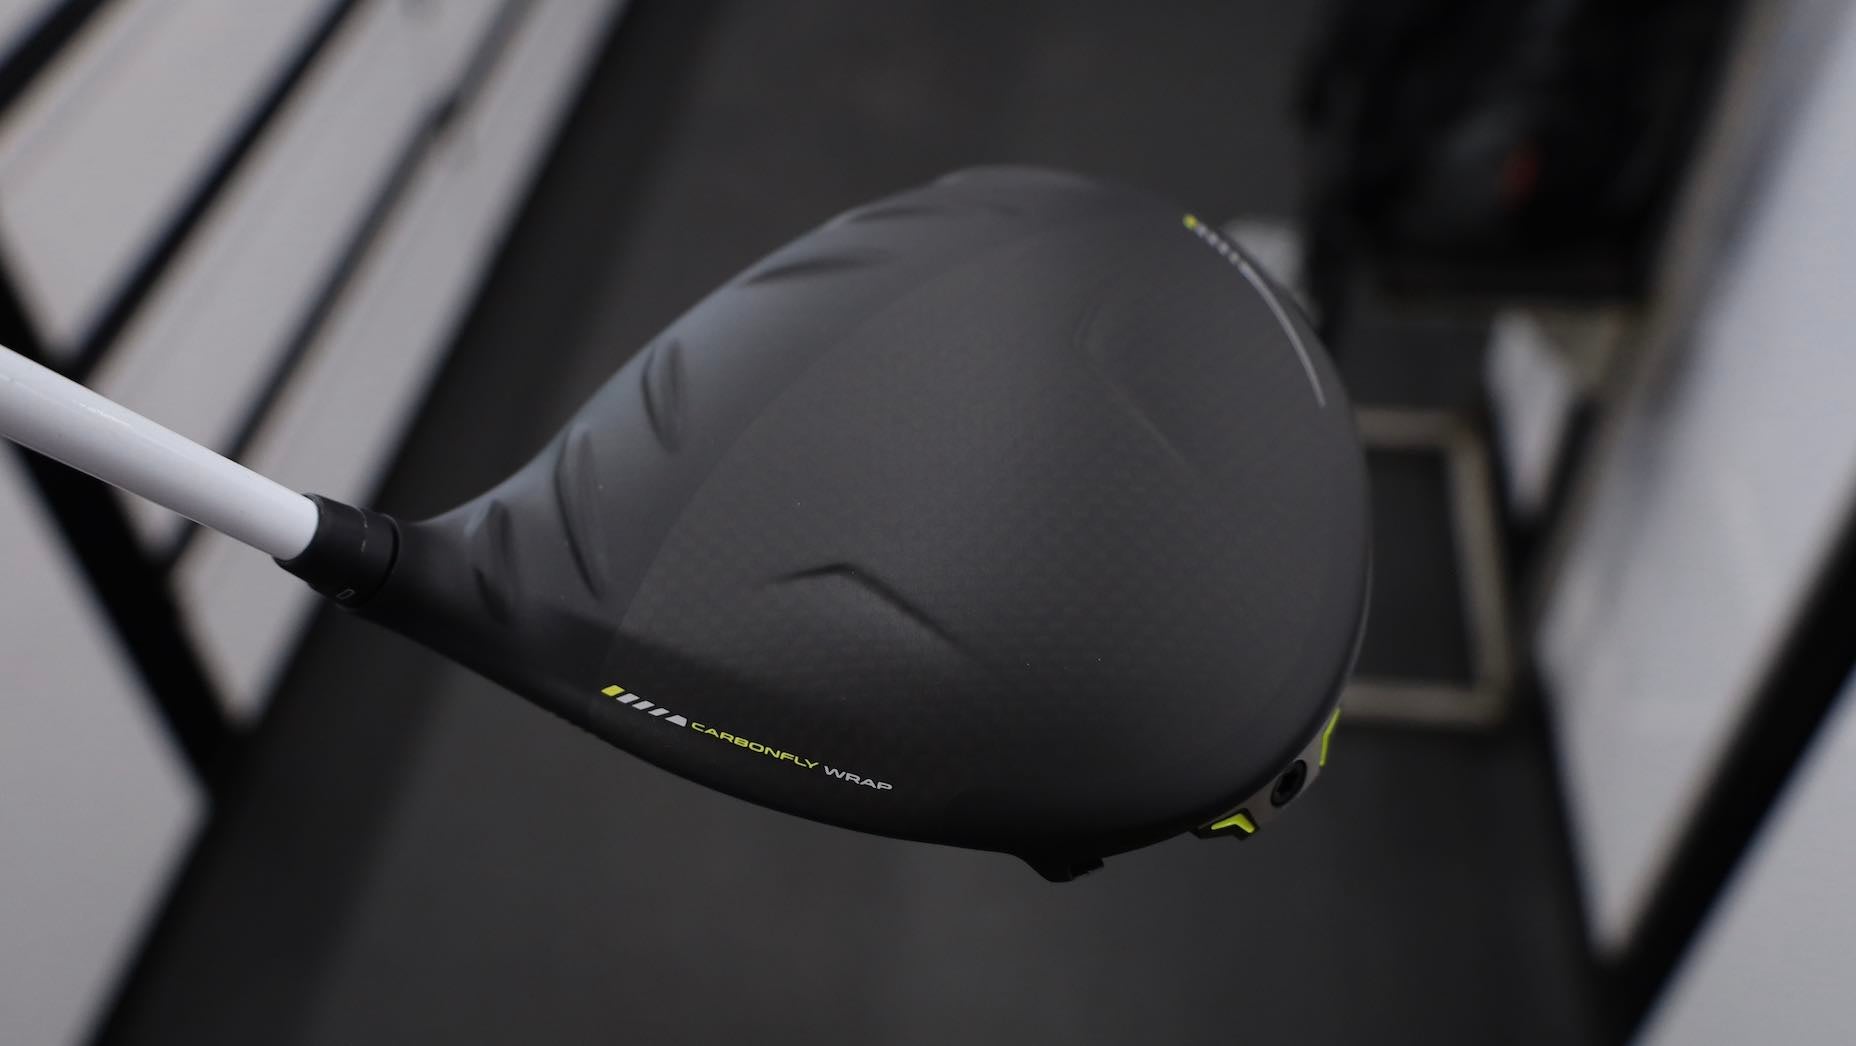 Ping G430 drivers, fairway woods, and hybrid | First Look